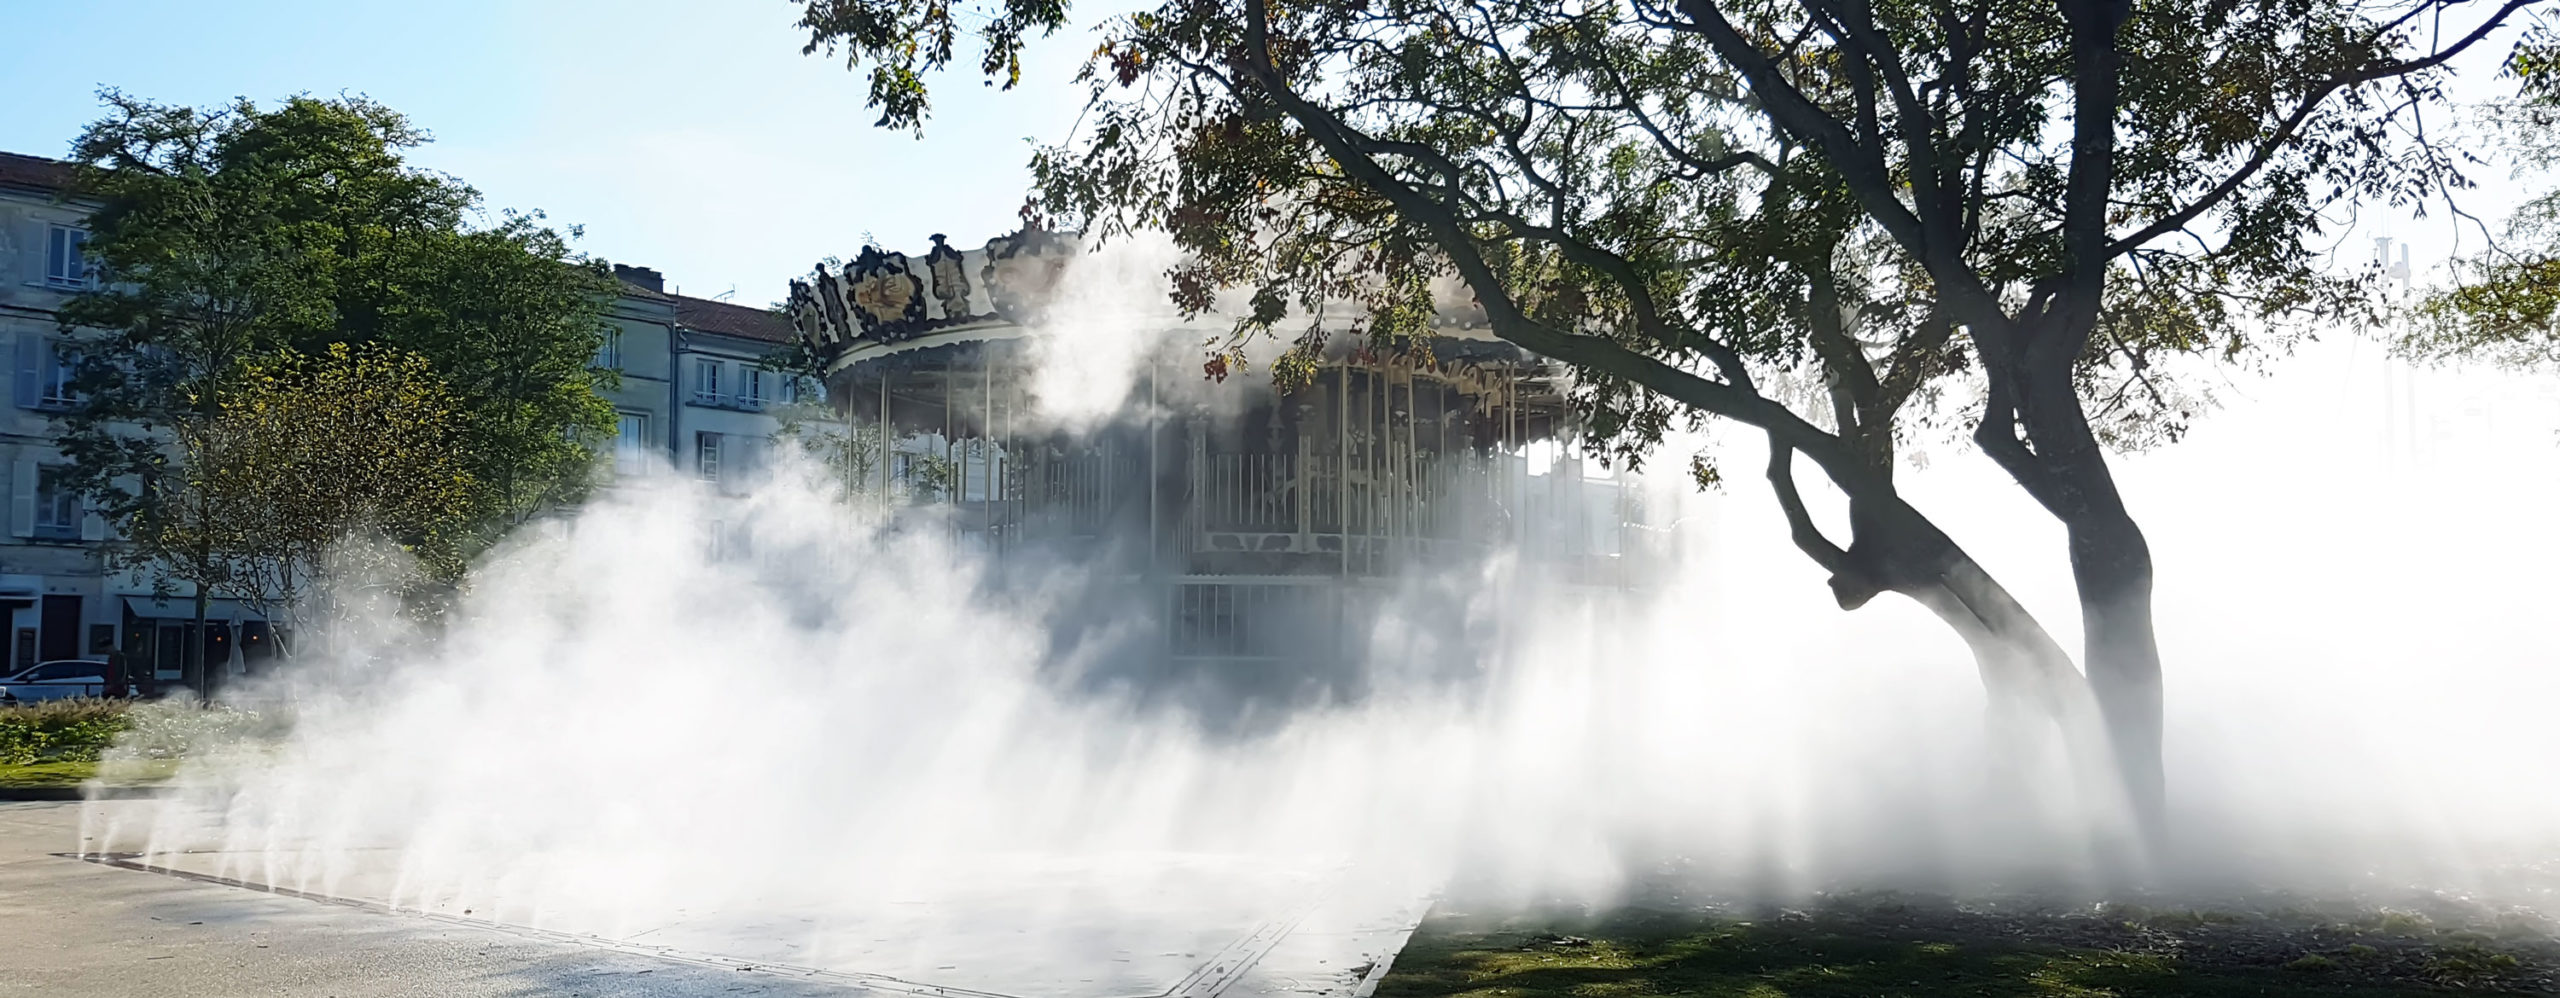 beziers jean jaures diluvial water feature fontaine fog brume fontaine